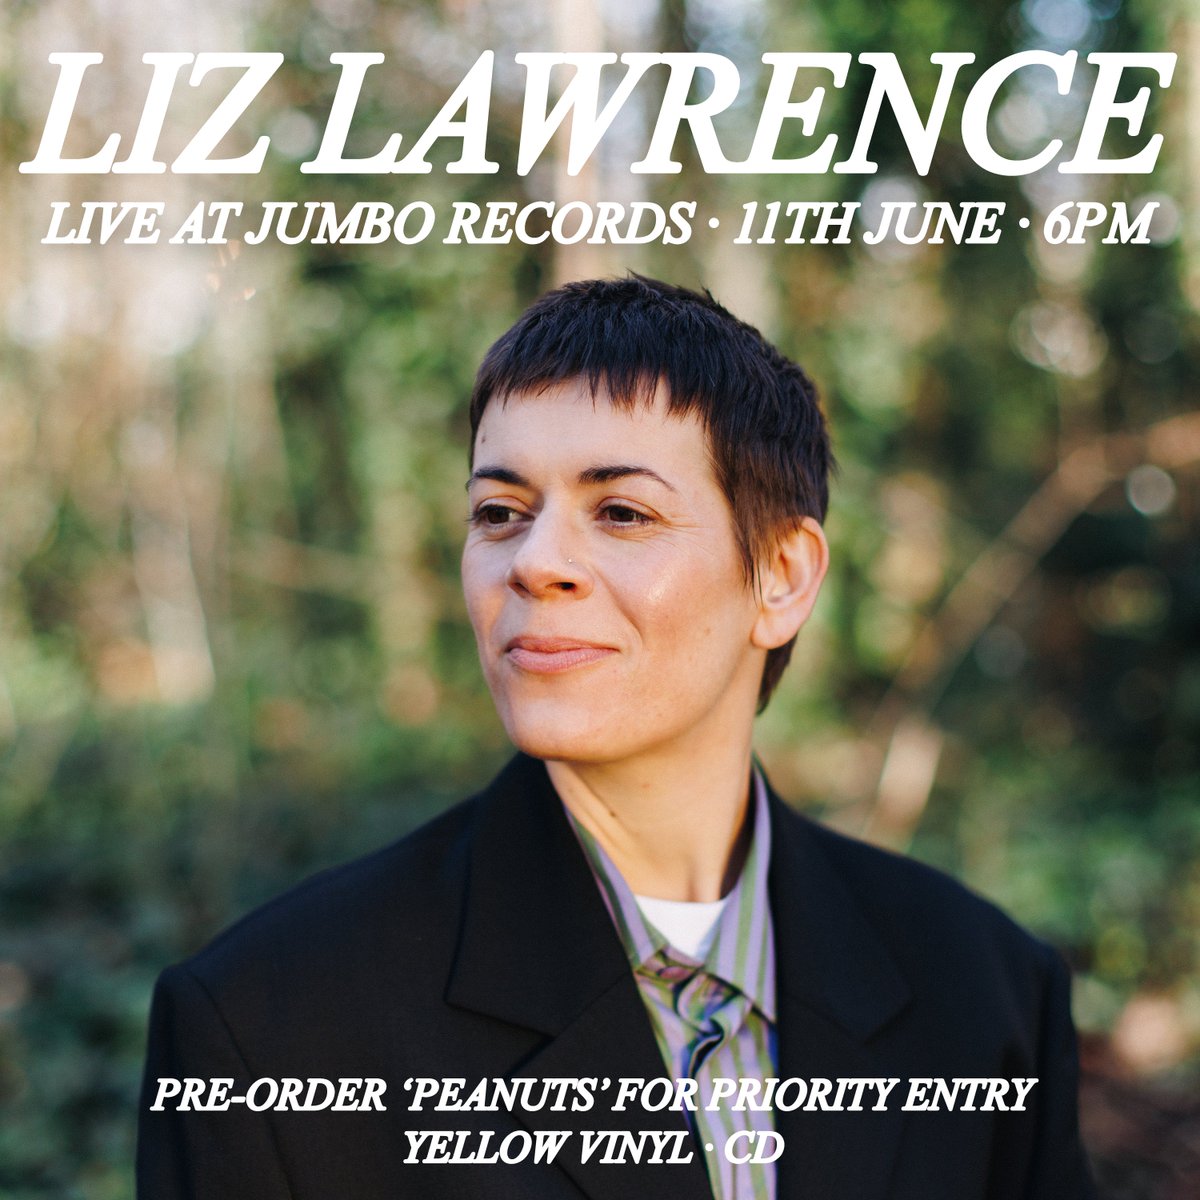 We're delighted to welcome Liz Lawrence to Jumbo for a special in-store gig on 11th June to celebrate her new album 'Peanuts'! For priority entry to the gig, pre-order the album here on yellow LP or CD: jumborecords.co.uk/news-single.as…